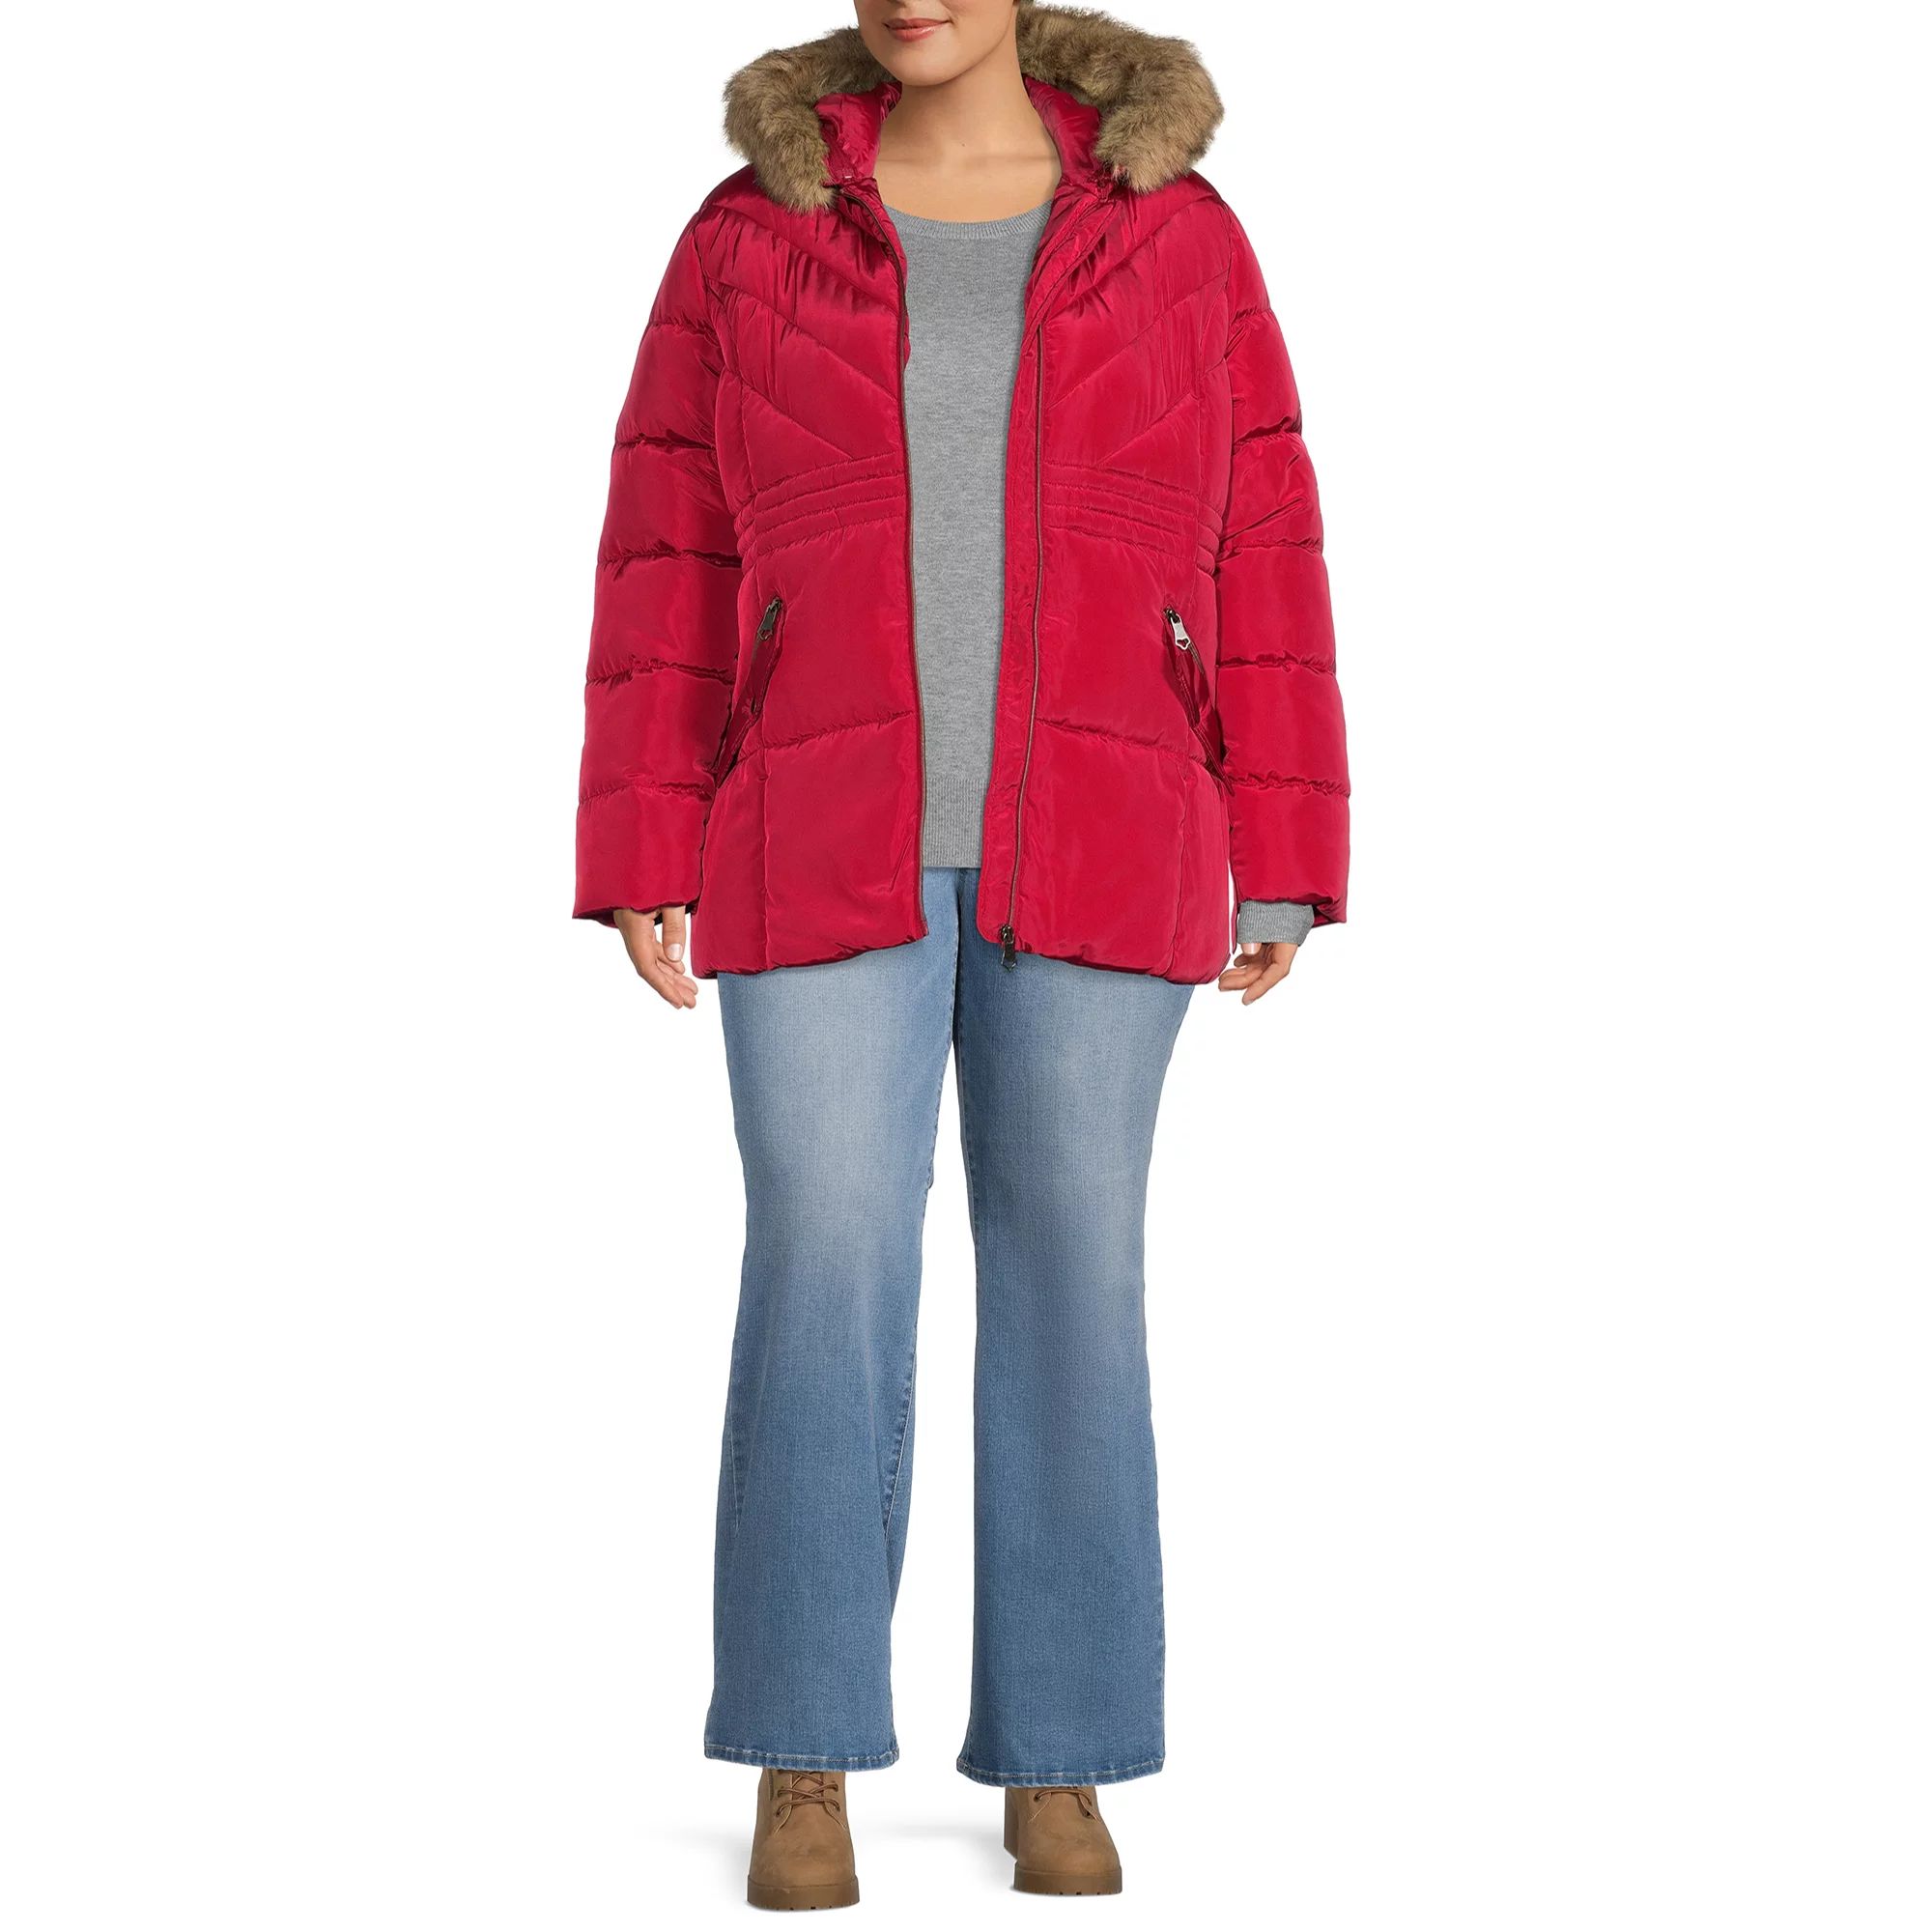 Big Chill Women's Plus Size Quilted Puffer Jacket with Faux Fur Trim Hood | Walmart (US)